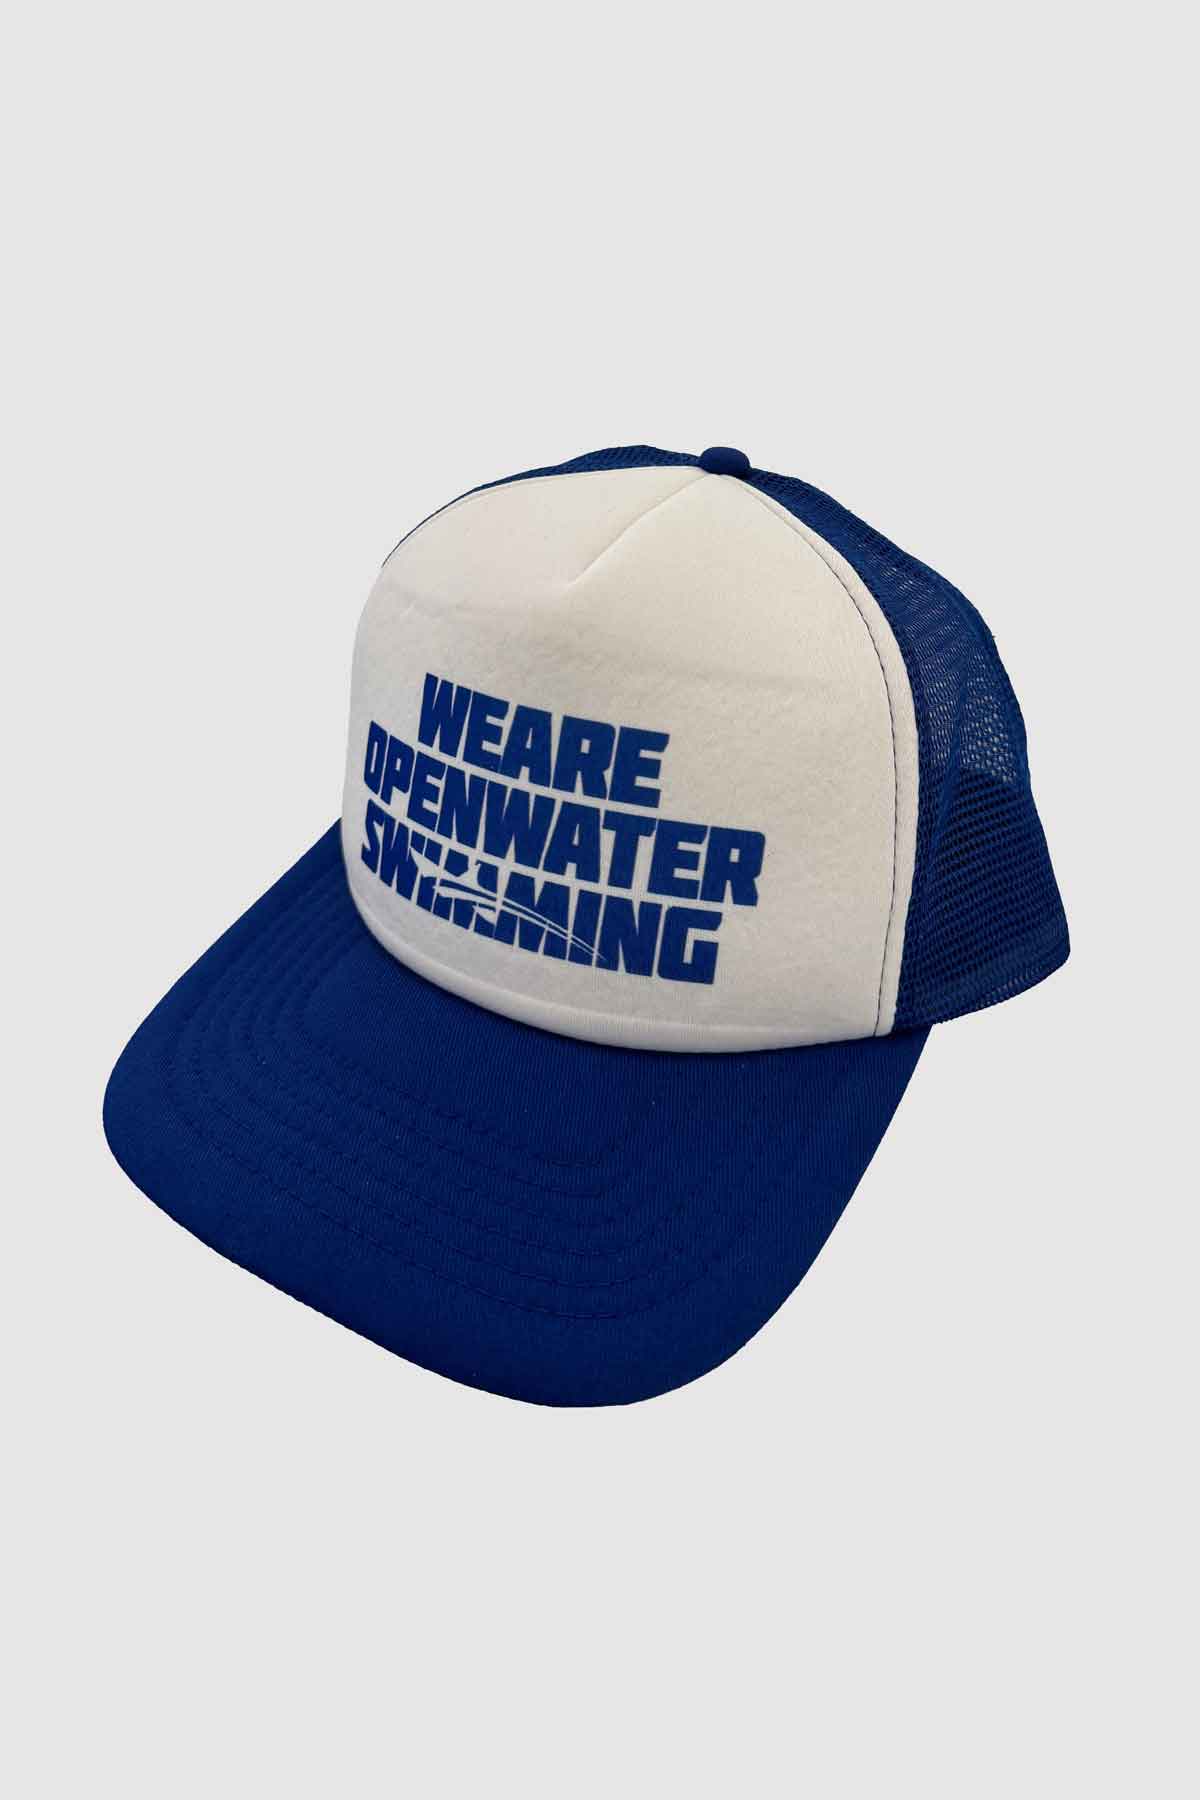 We are open water swimming oceanman cap in blue and white